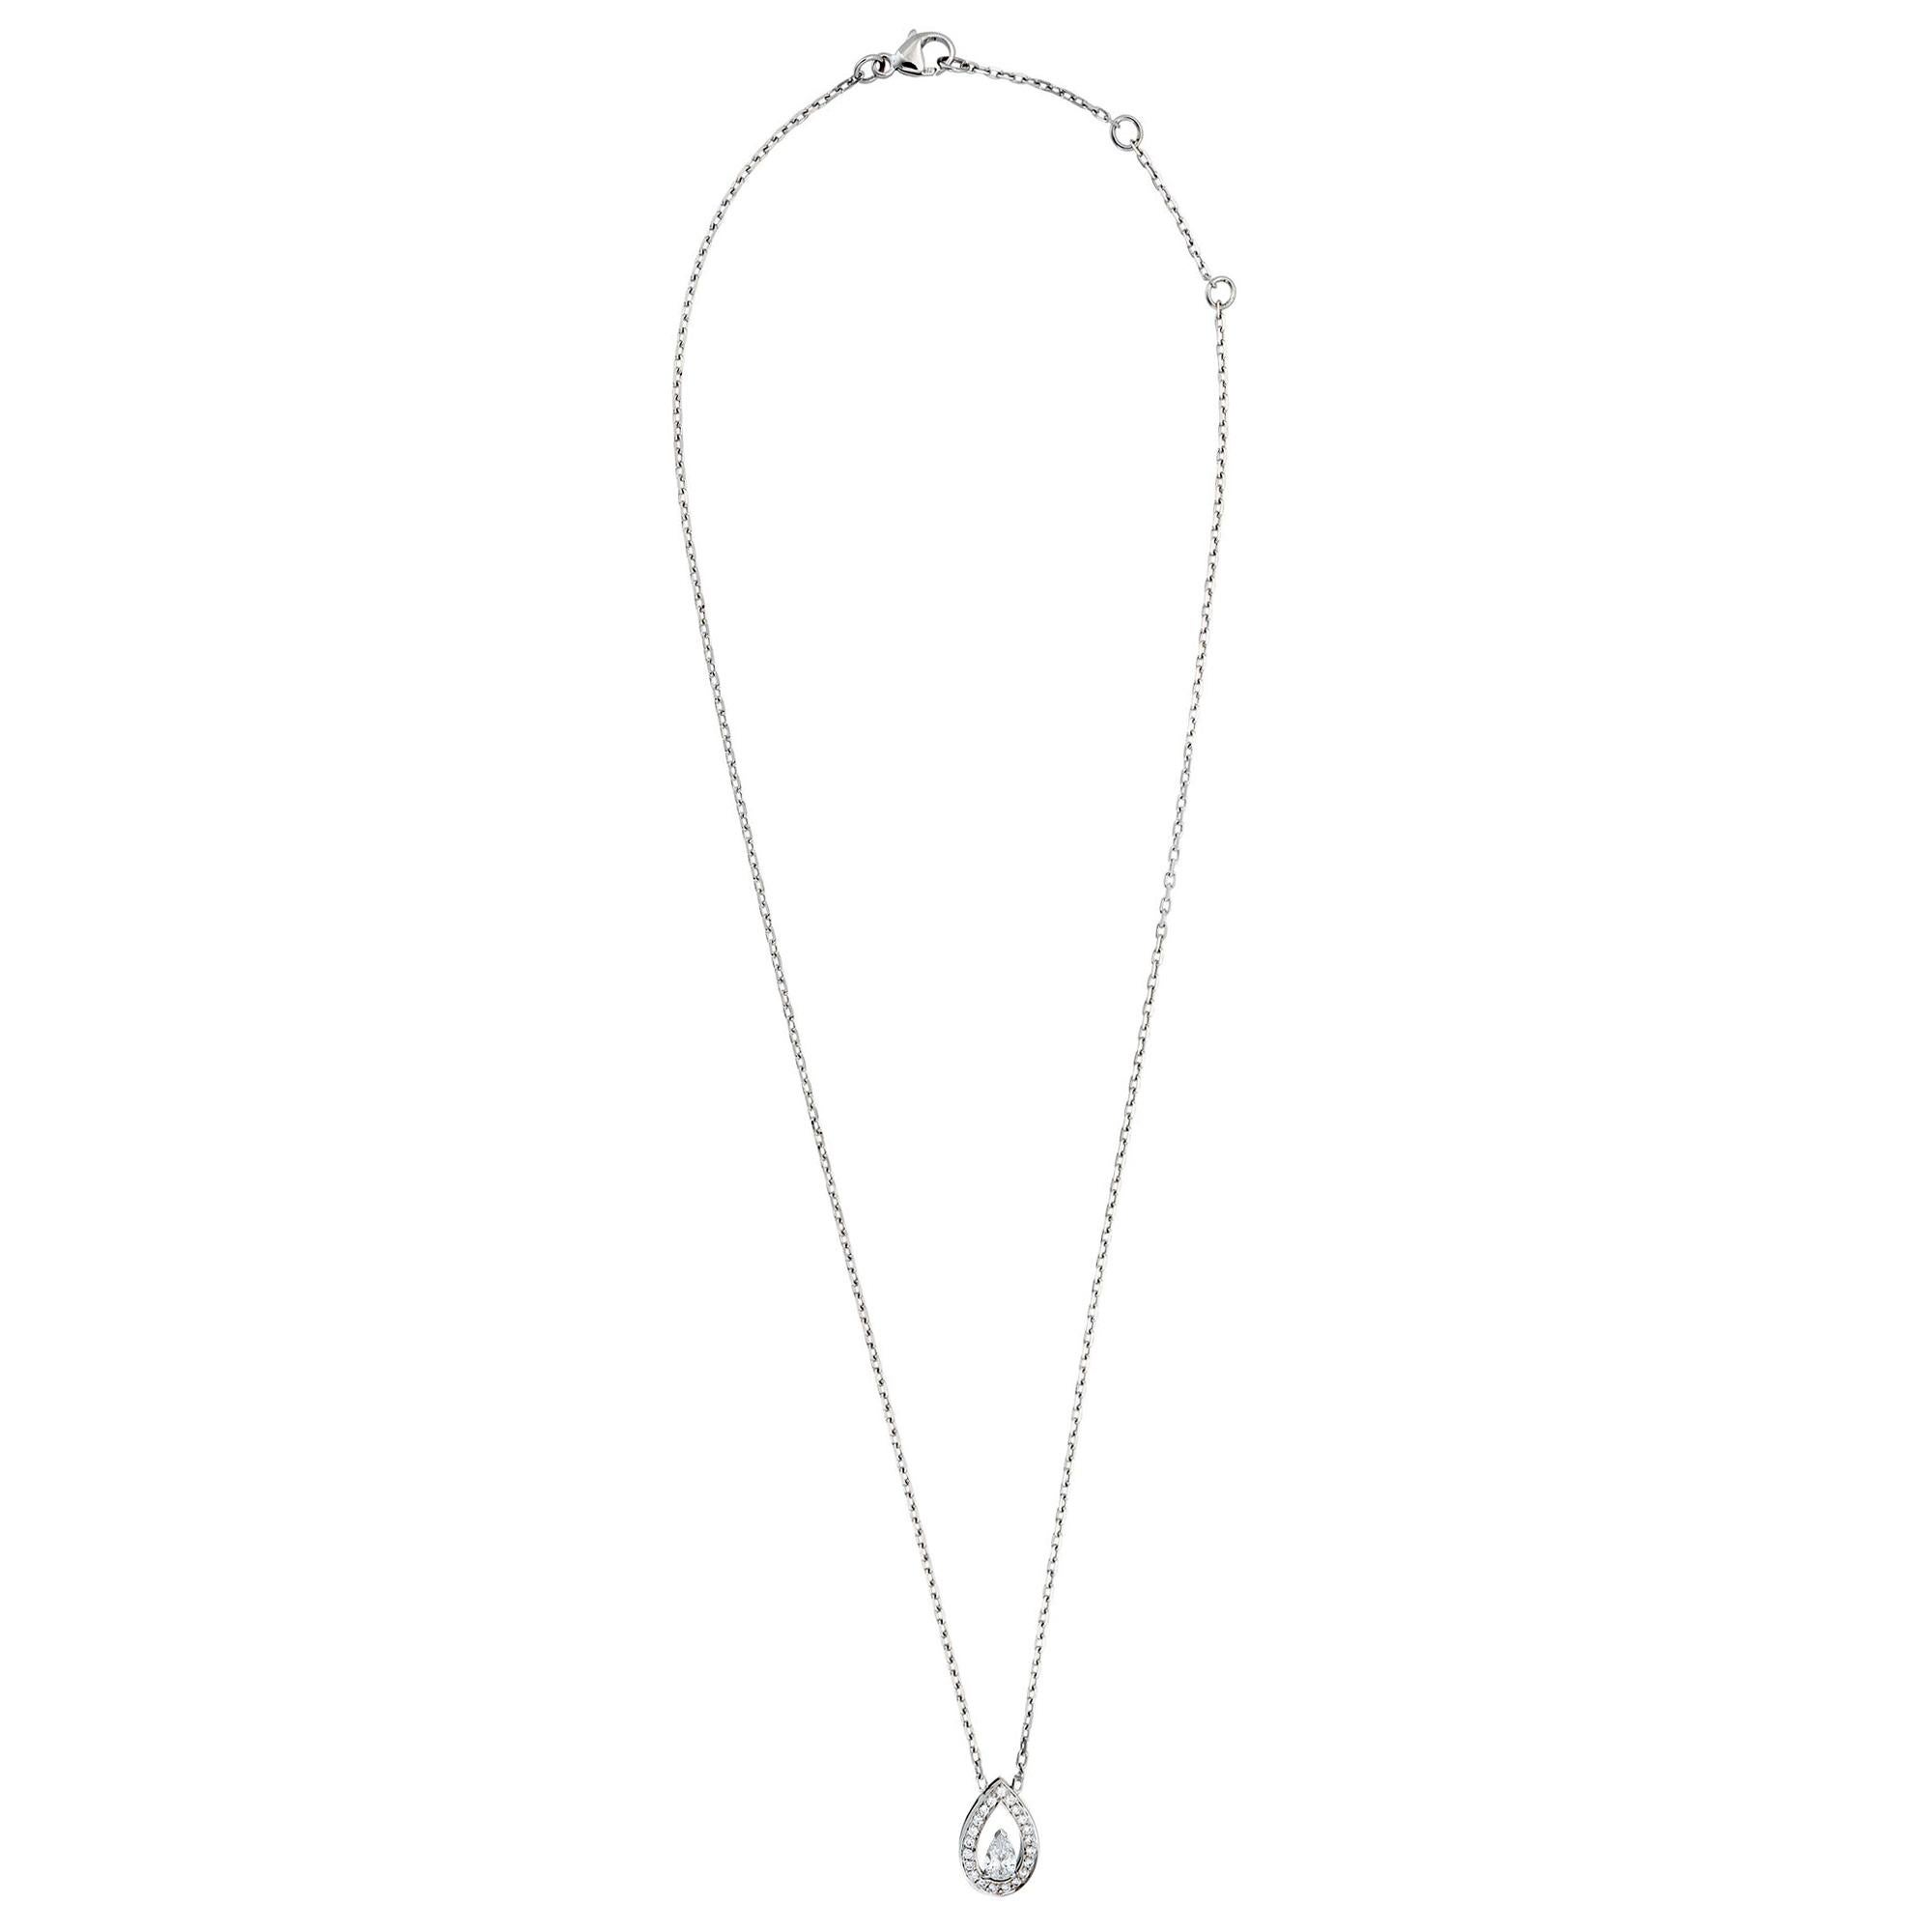 A chic timeless Fred Of Paris diamond necklace showcasing a GIA certified .53ct Vs2 clarity, E color diamond wrapped with an additional .25ct of round brilliant cut diamonds in shimmering 18k white gold. The necklace measures 16 inches in length and